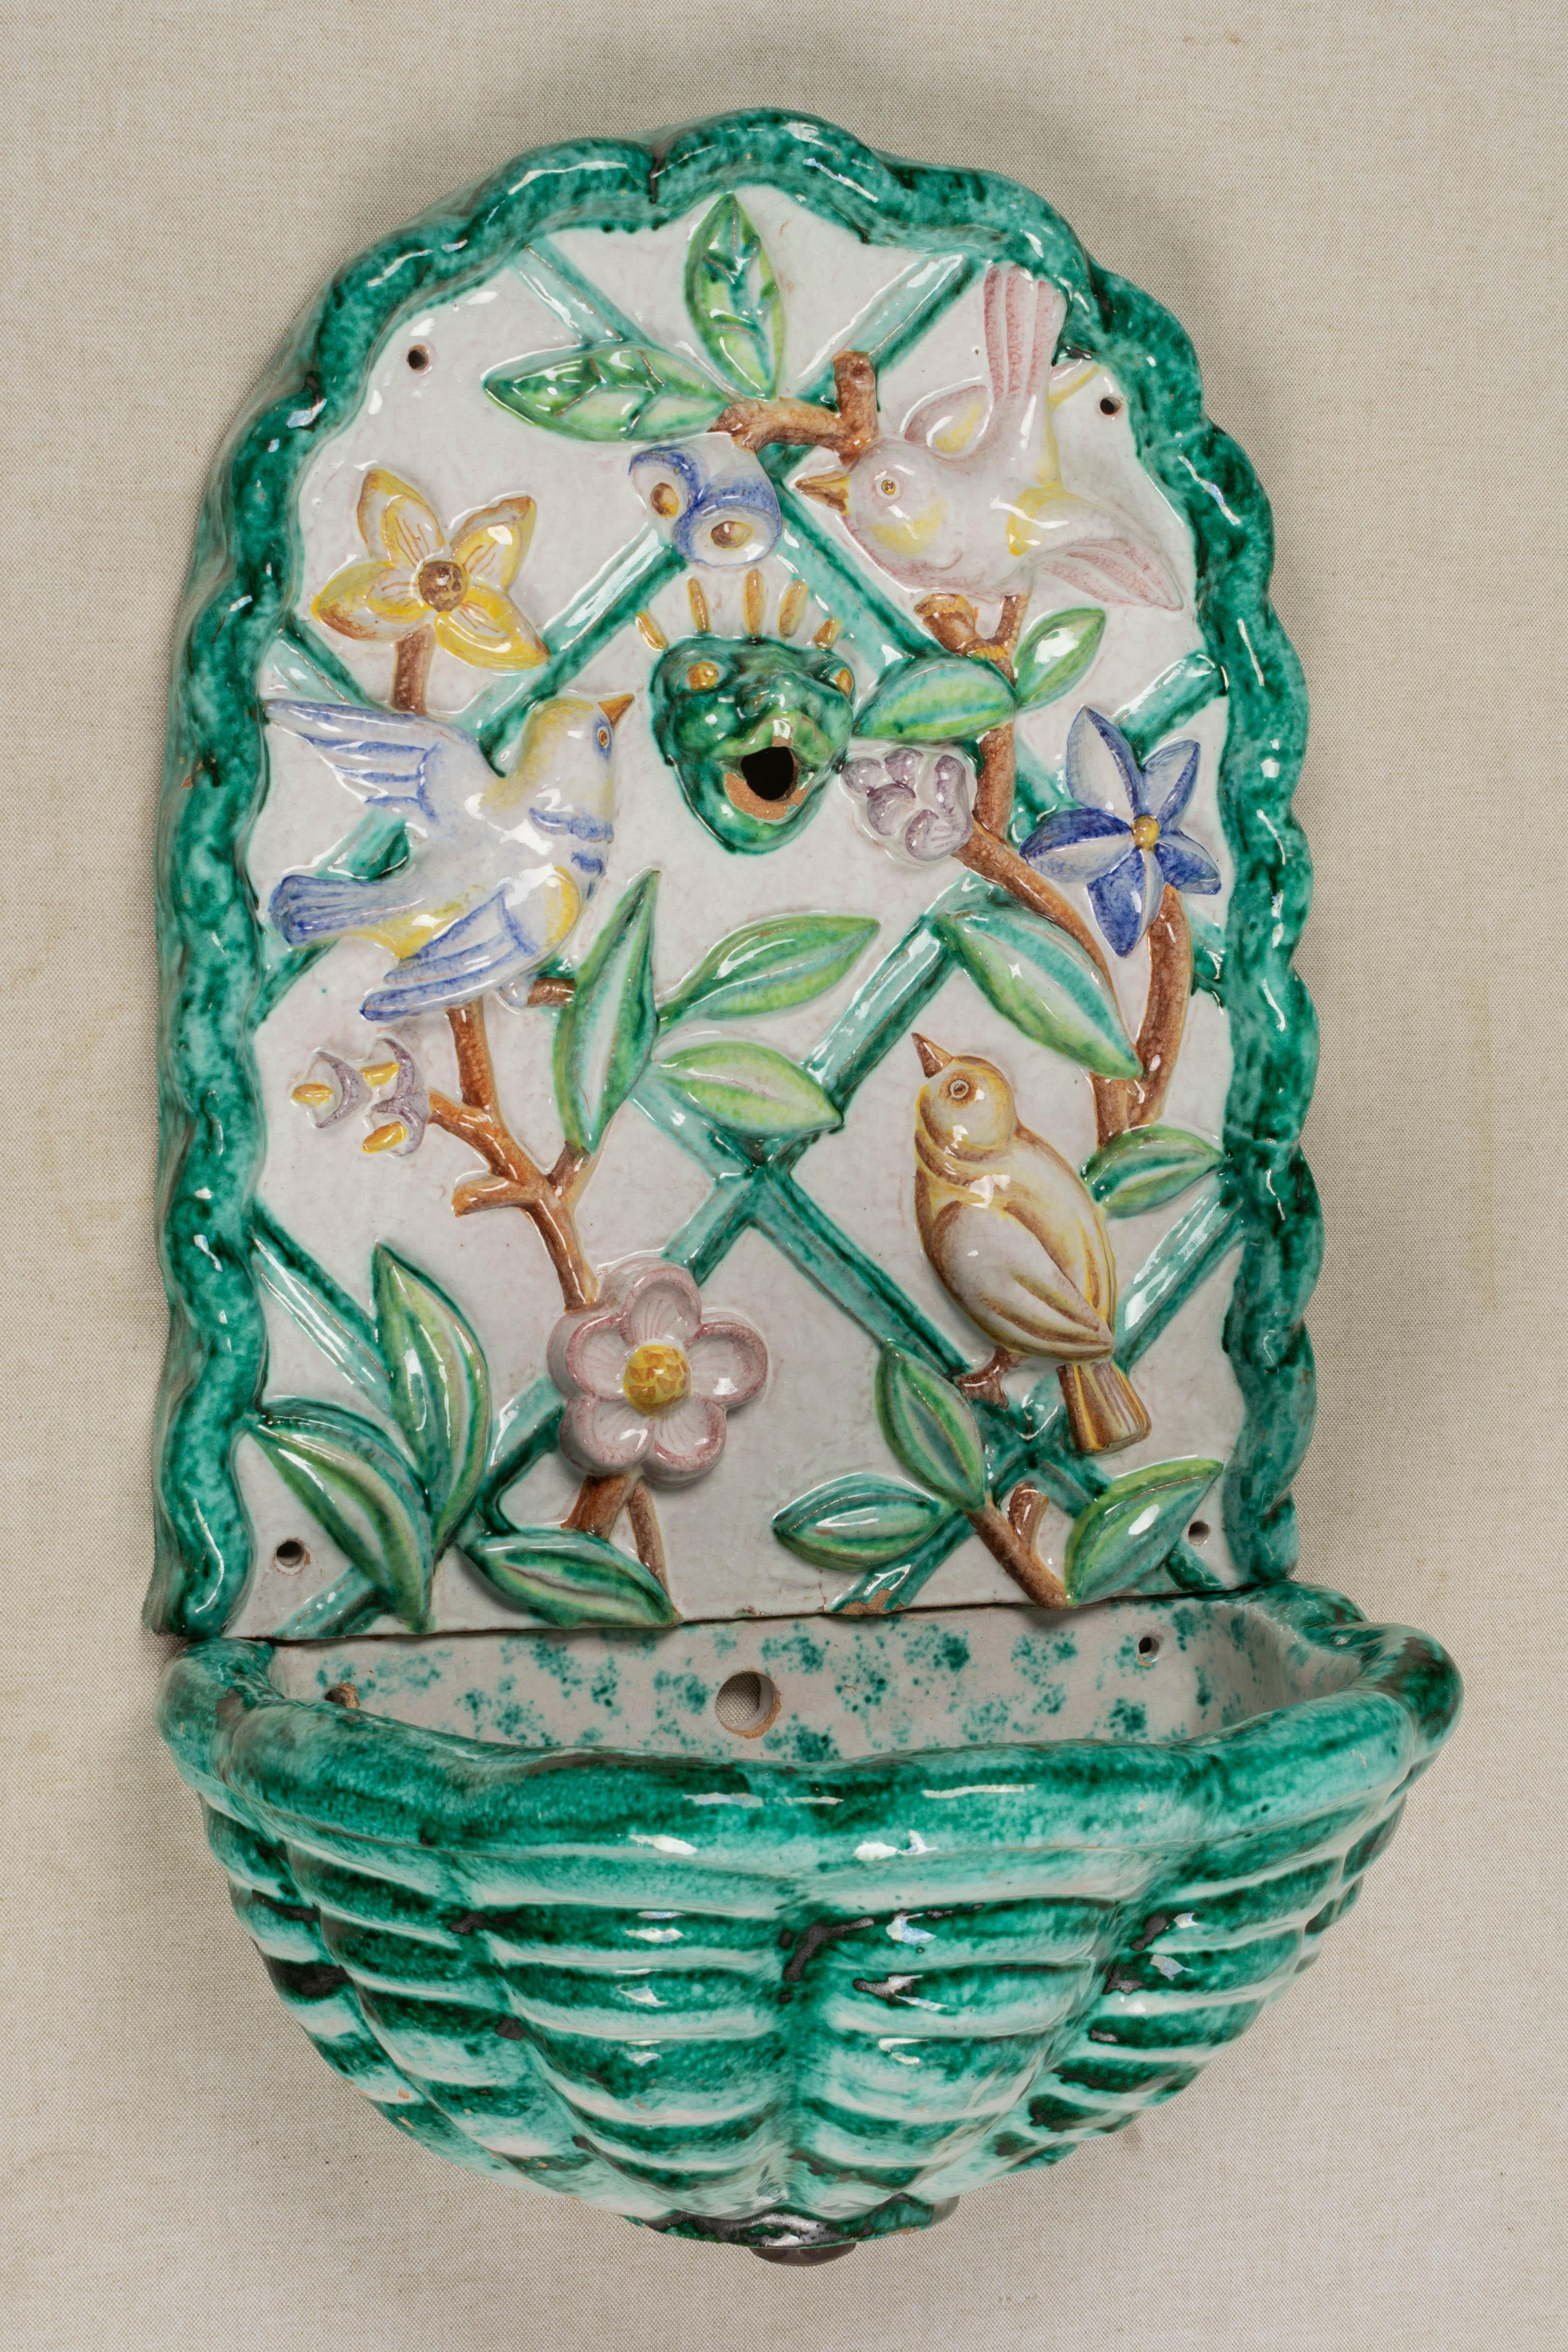 A midcentury Italian glazed terracotta wall fountain, or lavabo. In two parts with a decorative plaque above a demilune basin. Fountain back has an Art Deco style relief of birds and flowers on a trellis with whimsical frog head spout in the center.